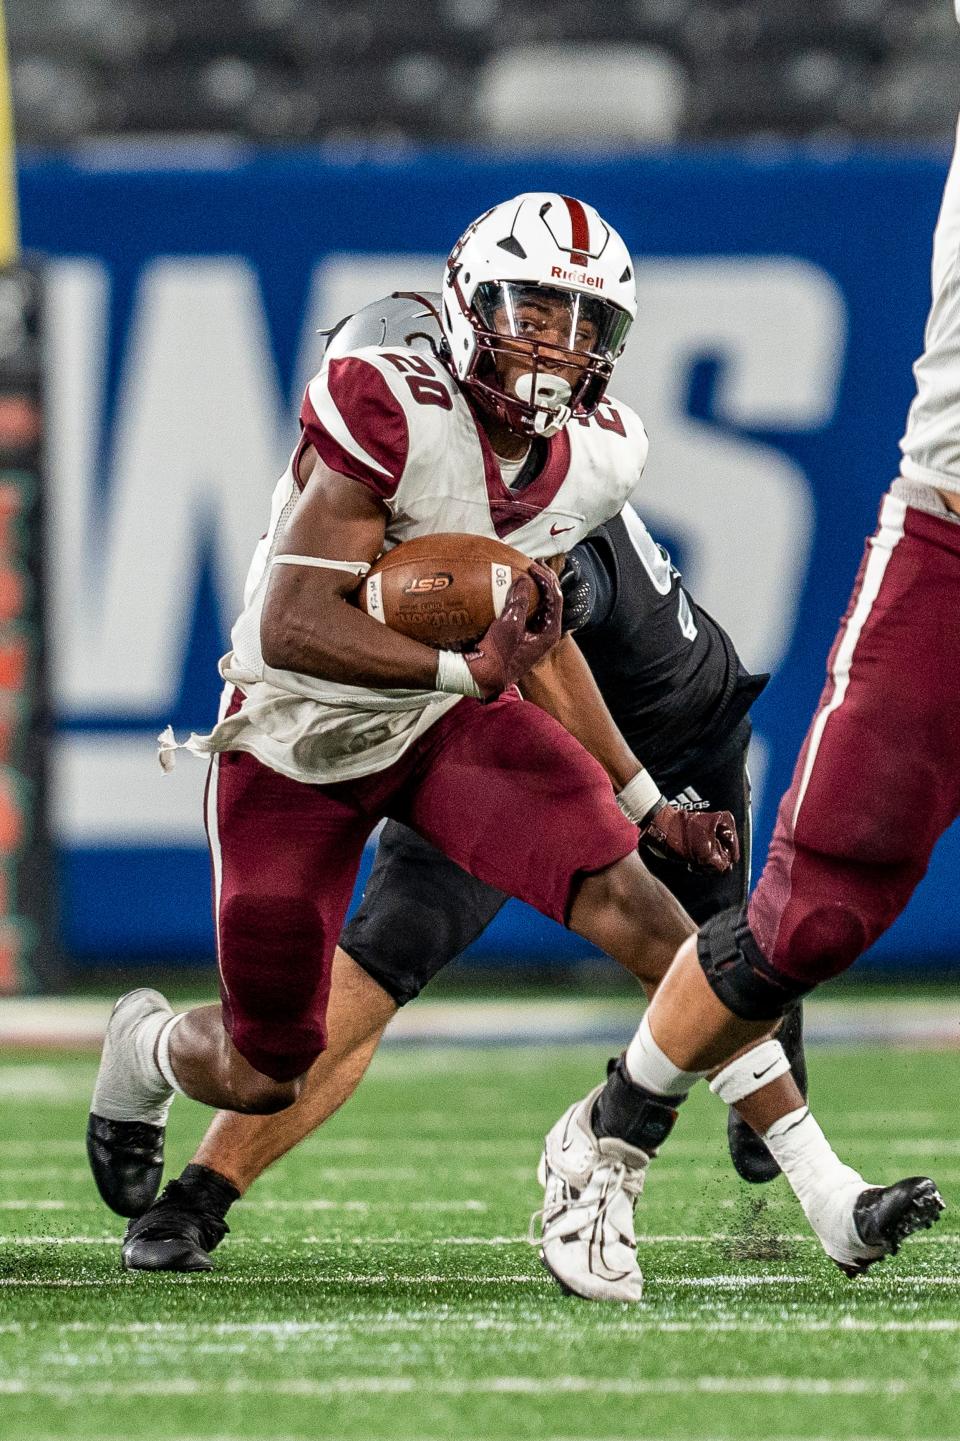 Don Bosco plays St. Peter's Prep in a football game at MetLife Stadium East Rutherford, NJ on Friday September 30, 2022. DB #20 Logan Bush with the ball.